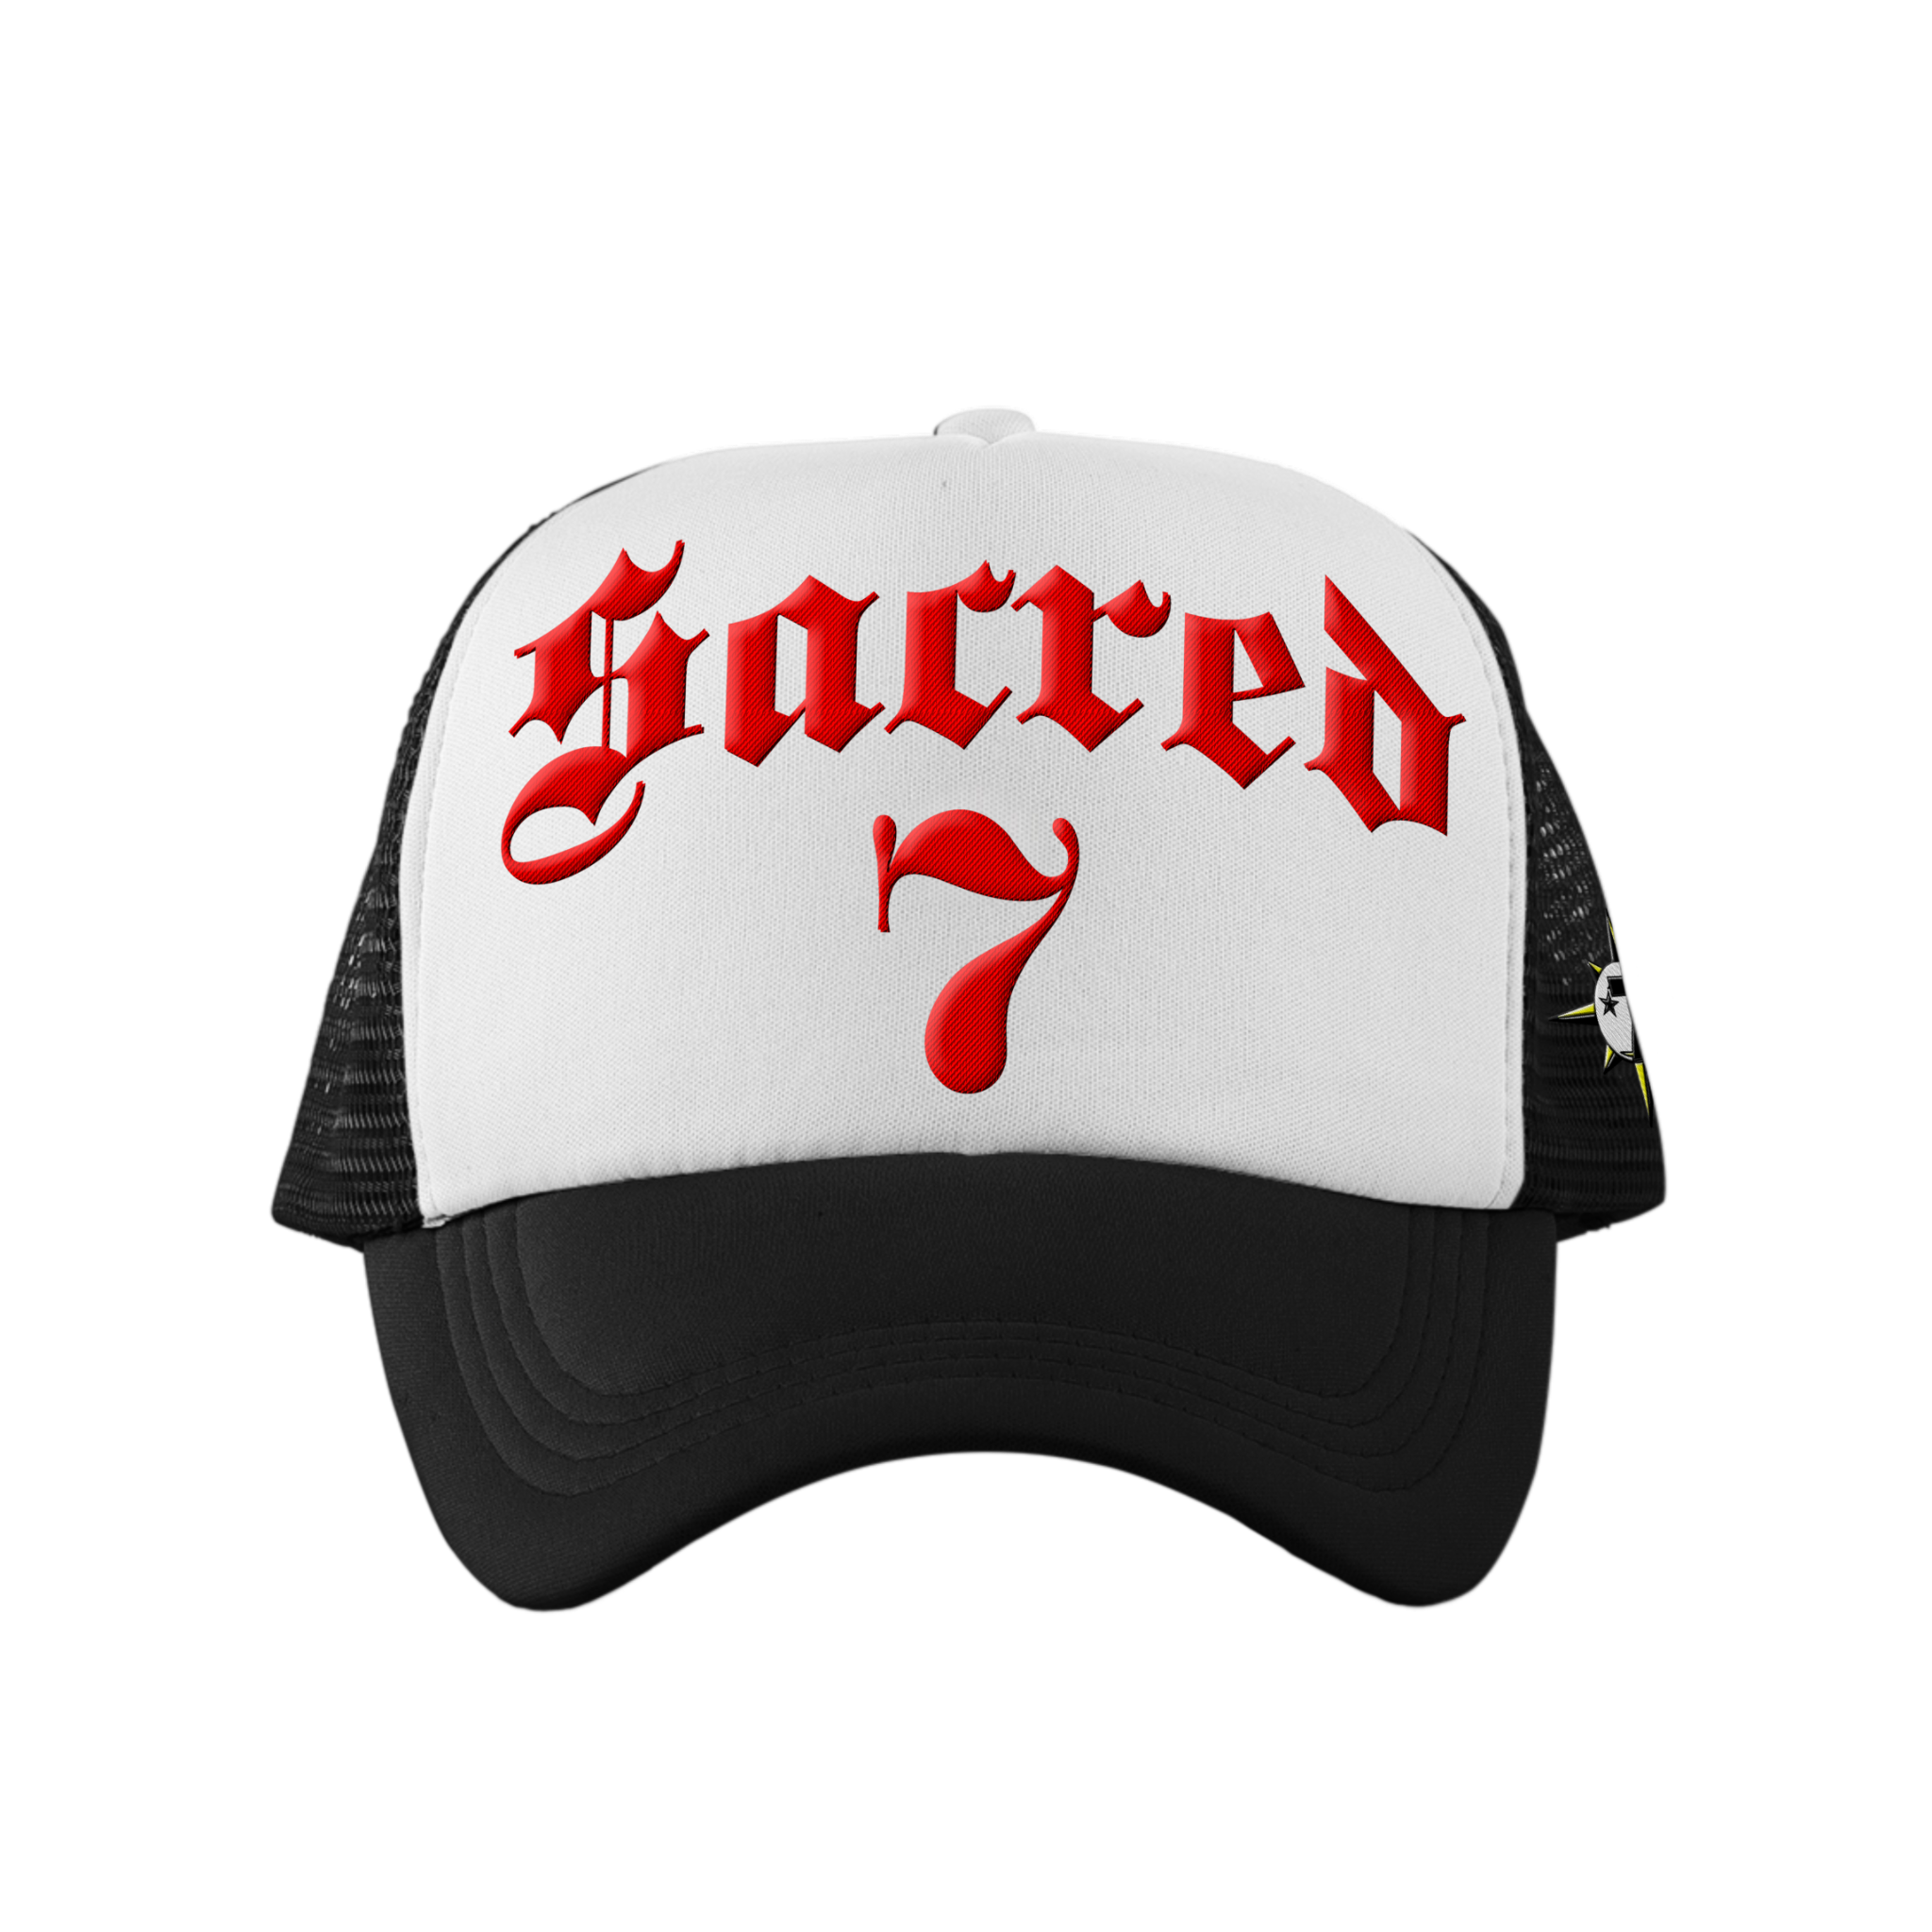 Sacred 7 Embroidered Trucker - Black & White W/ Red